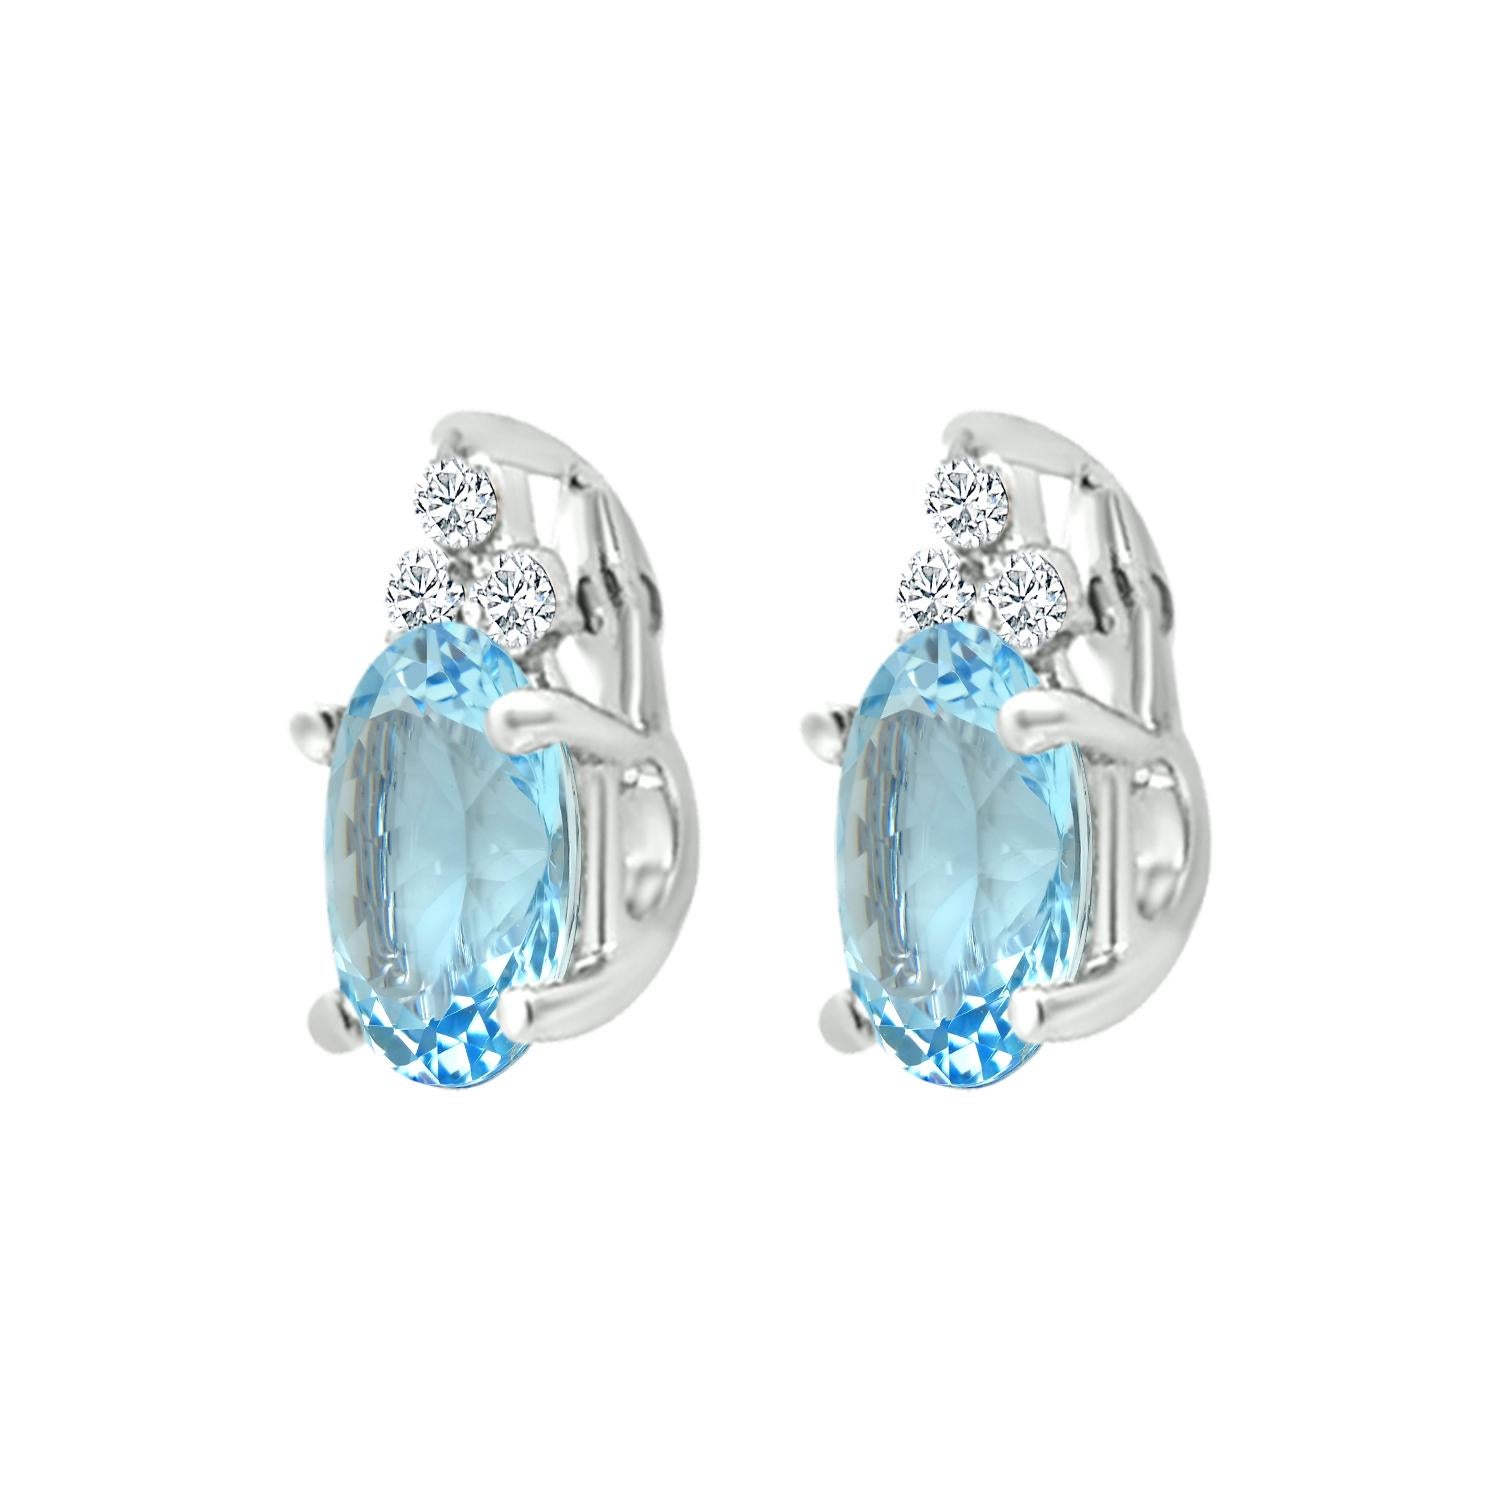 Aquamarine Is The Traditional March Birthstone And Aquamarine Stone Earrings Are Simply Stunning.
These Classic And Stylish Earrings Features Serene Blue 6x4mm Aquamarine Gemstone Secured In a Classic Four Prong Basket Setting With Beautiful Diamond